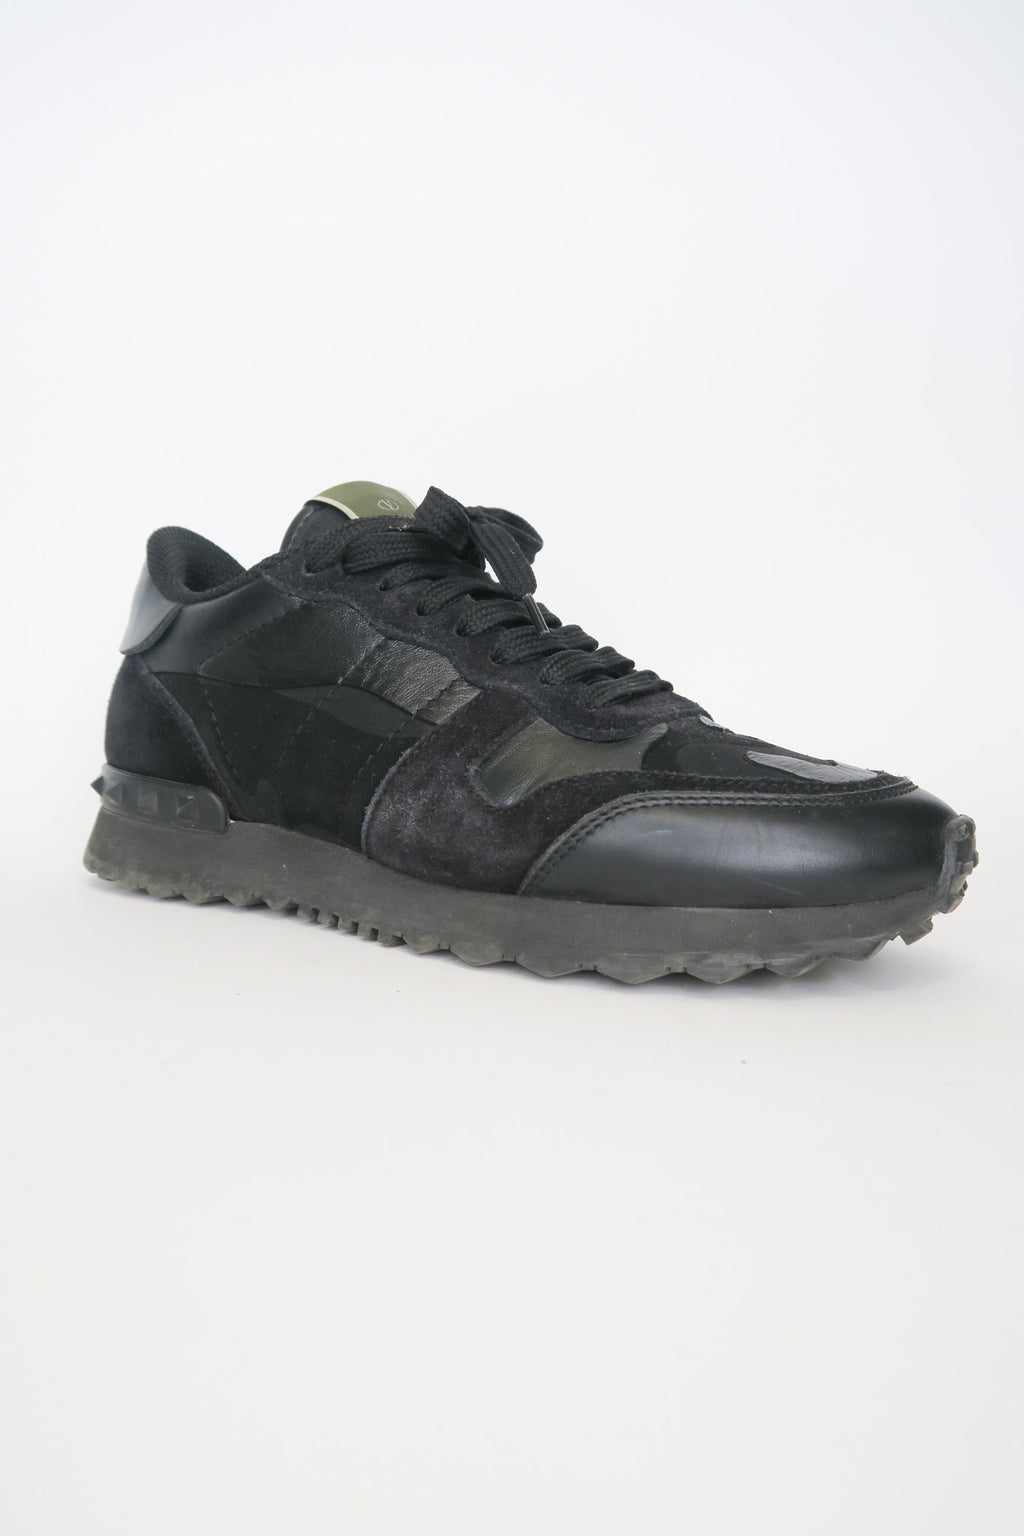 Valentino Rockstud Accent Athletic Sneakers sz 37